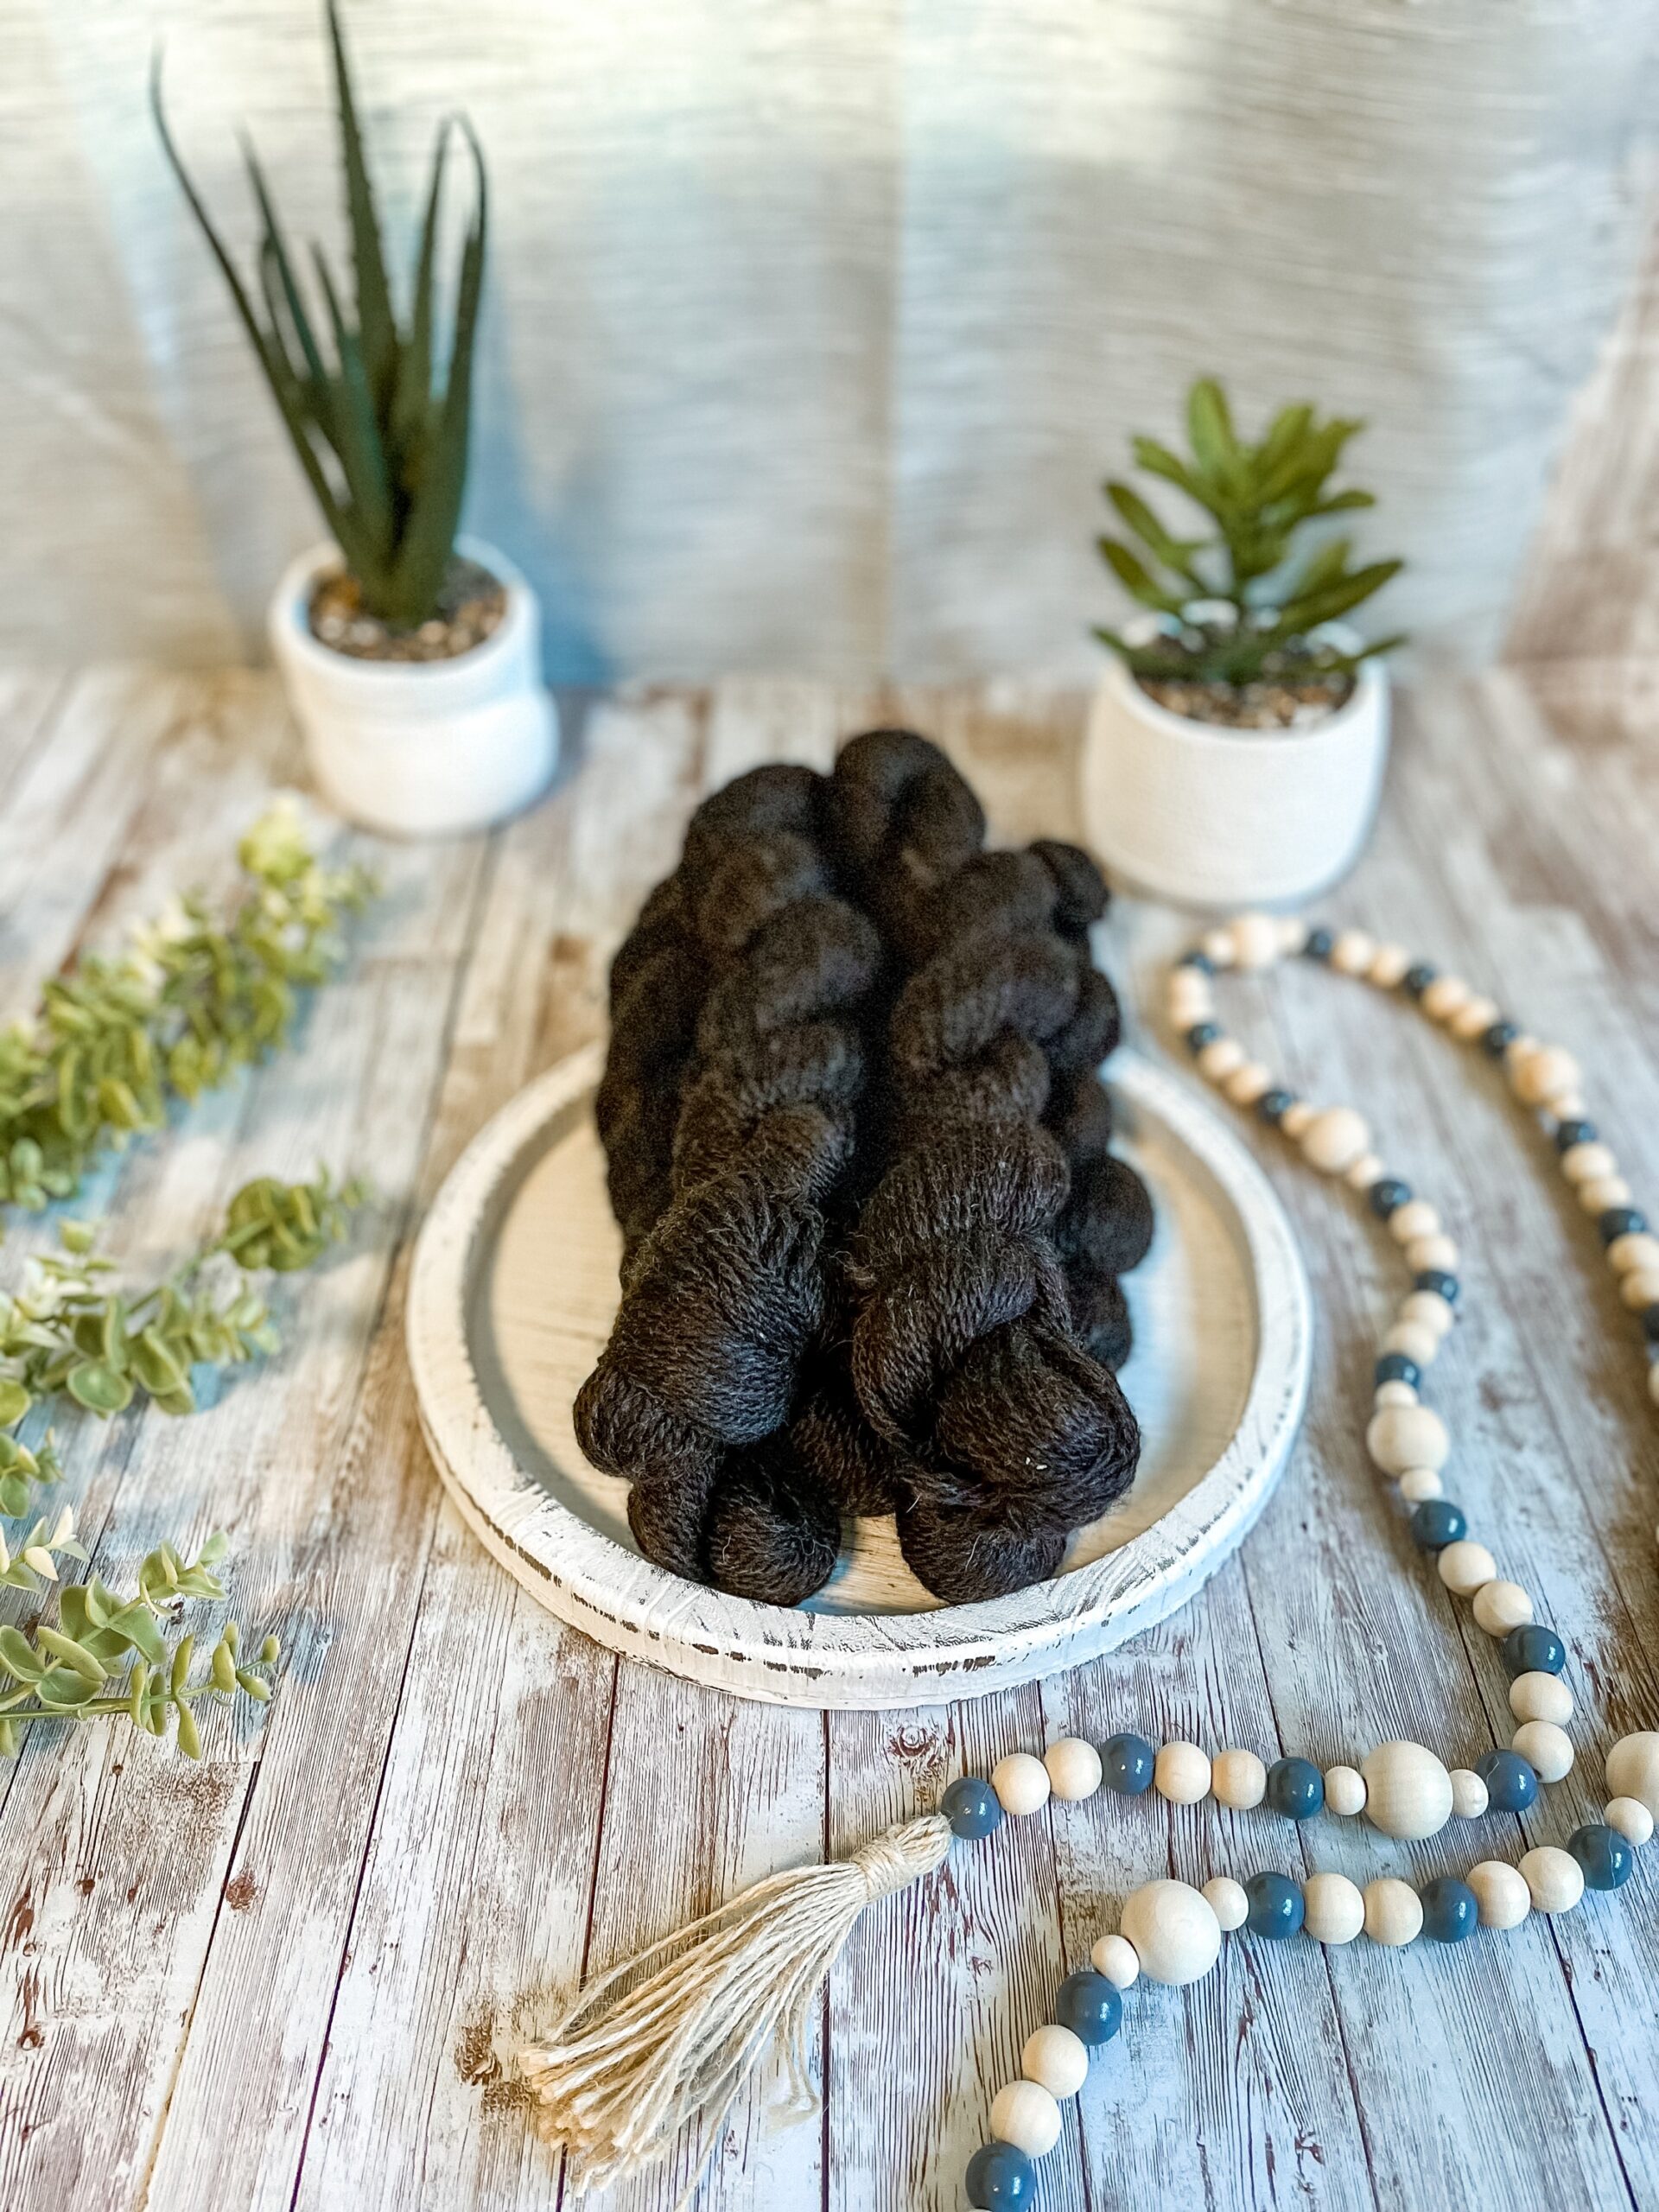 Five skeins of natural black alpaca yarn rests on a white wood trivet. They are surrounded by beads to the right, greenery to the left and 2 succulent plants in the background.